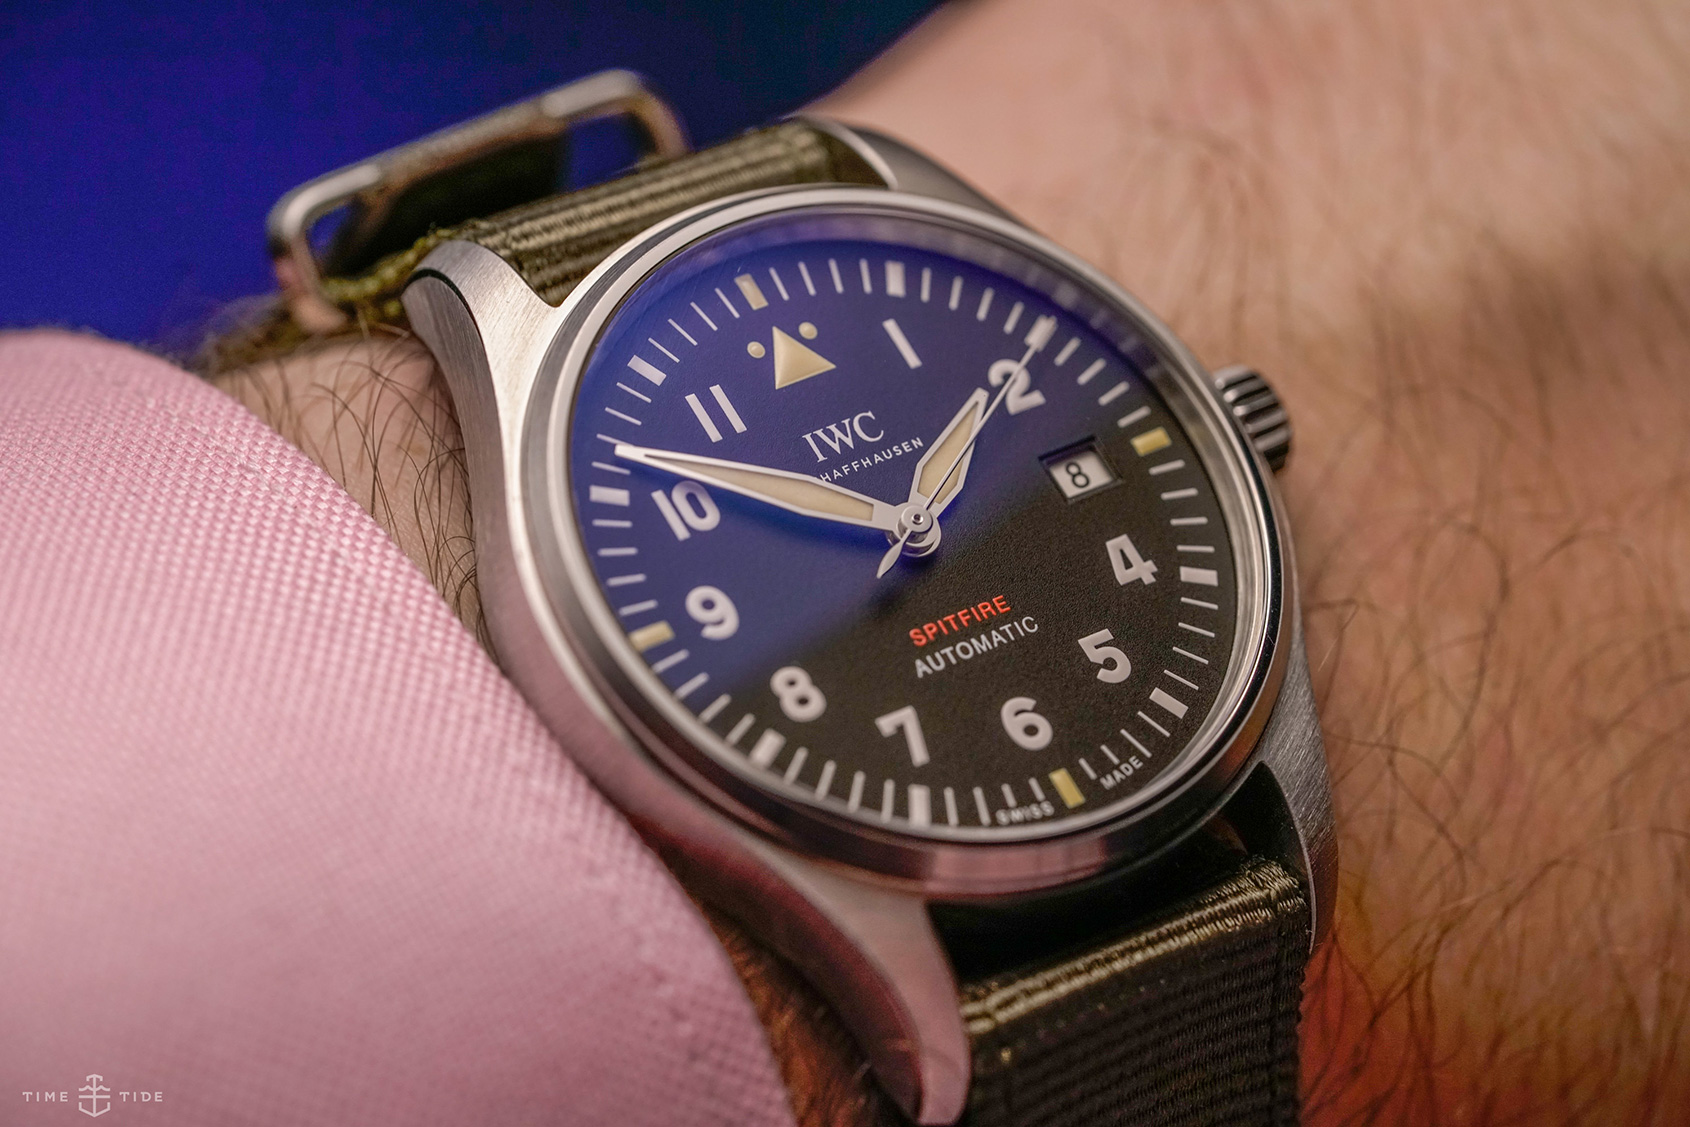 Iwc spitfire review